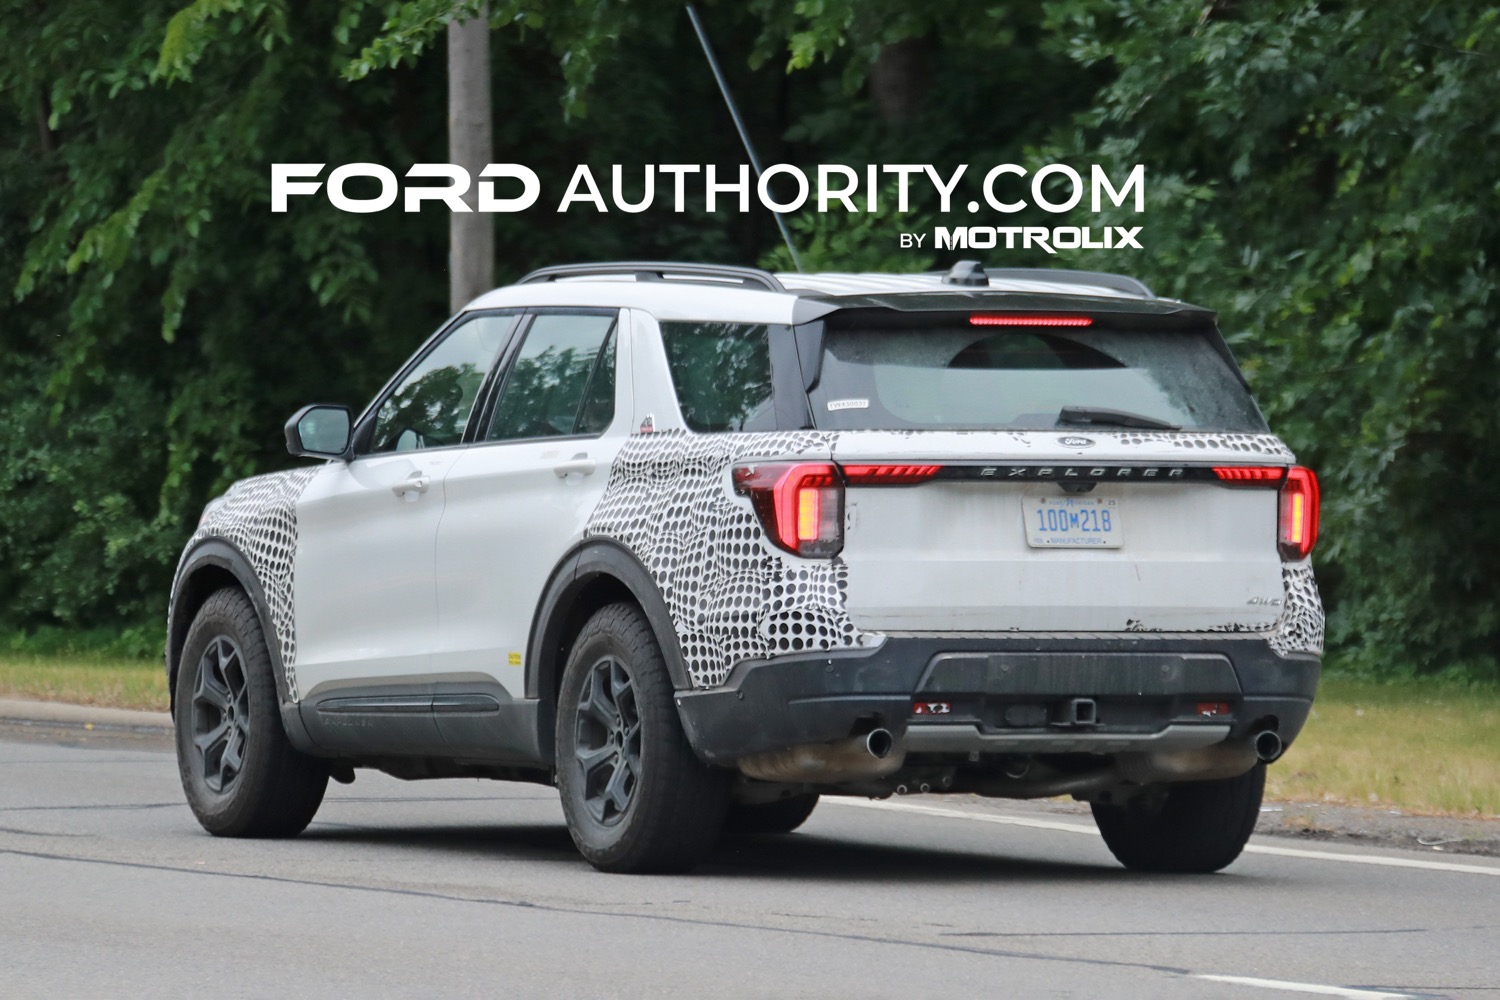 Ford Explorer Refresh Pushed Back To 2025 Model Year: Exclusive